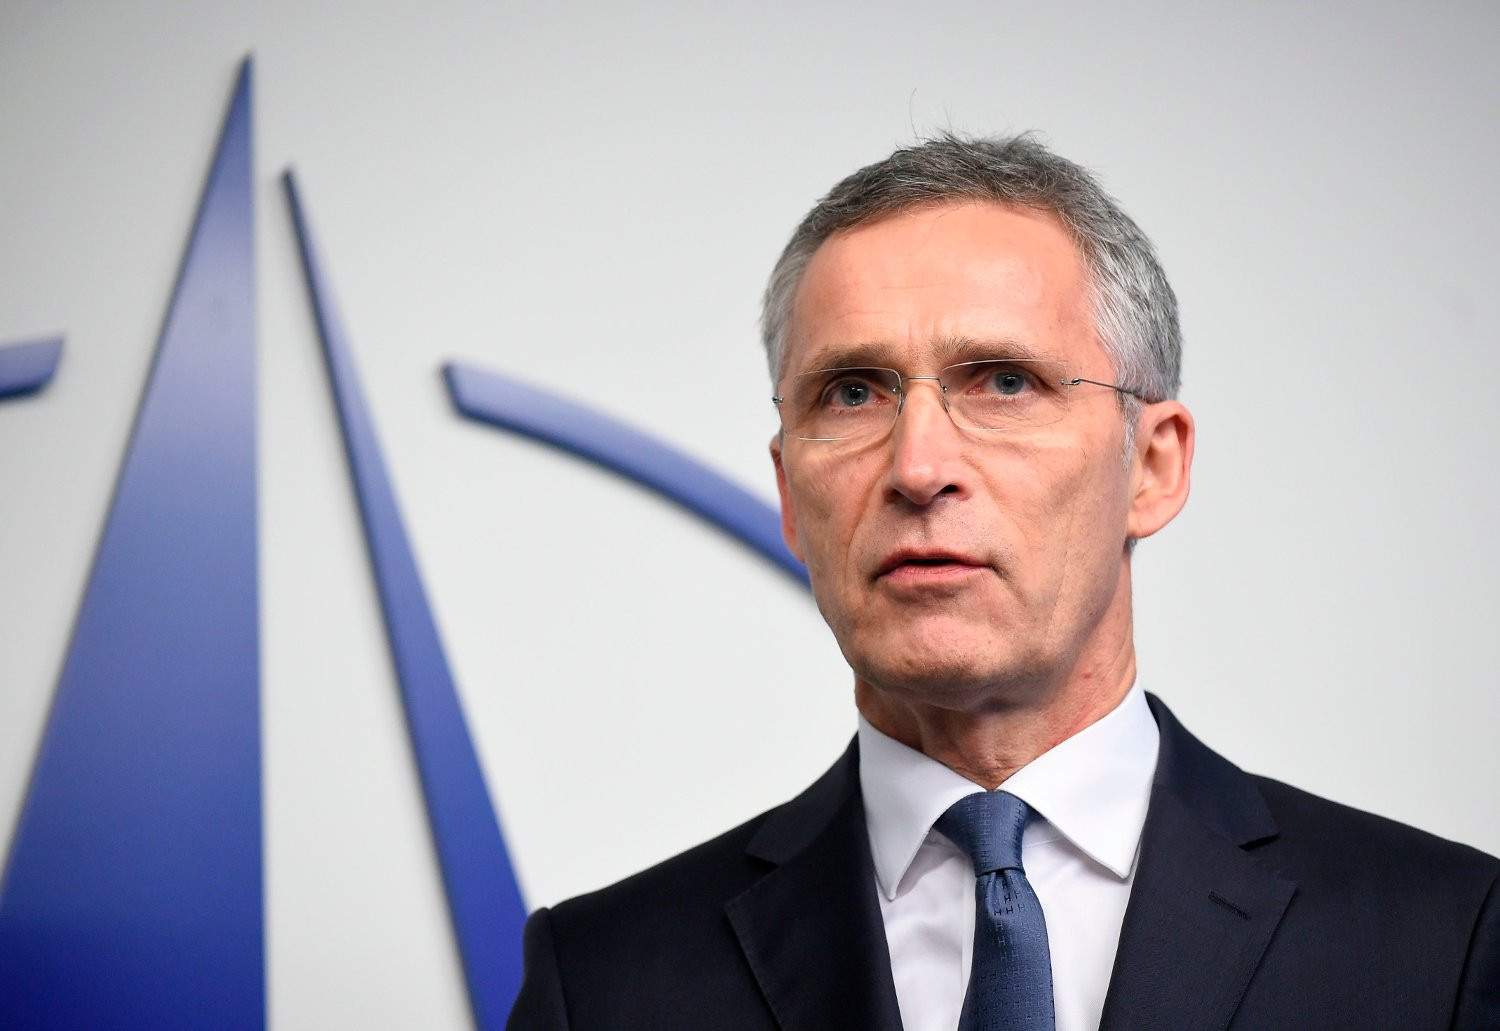 NATO chief warns about protracted war in Ukraine